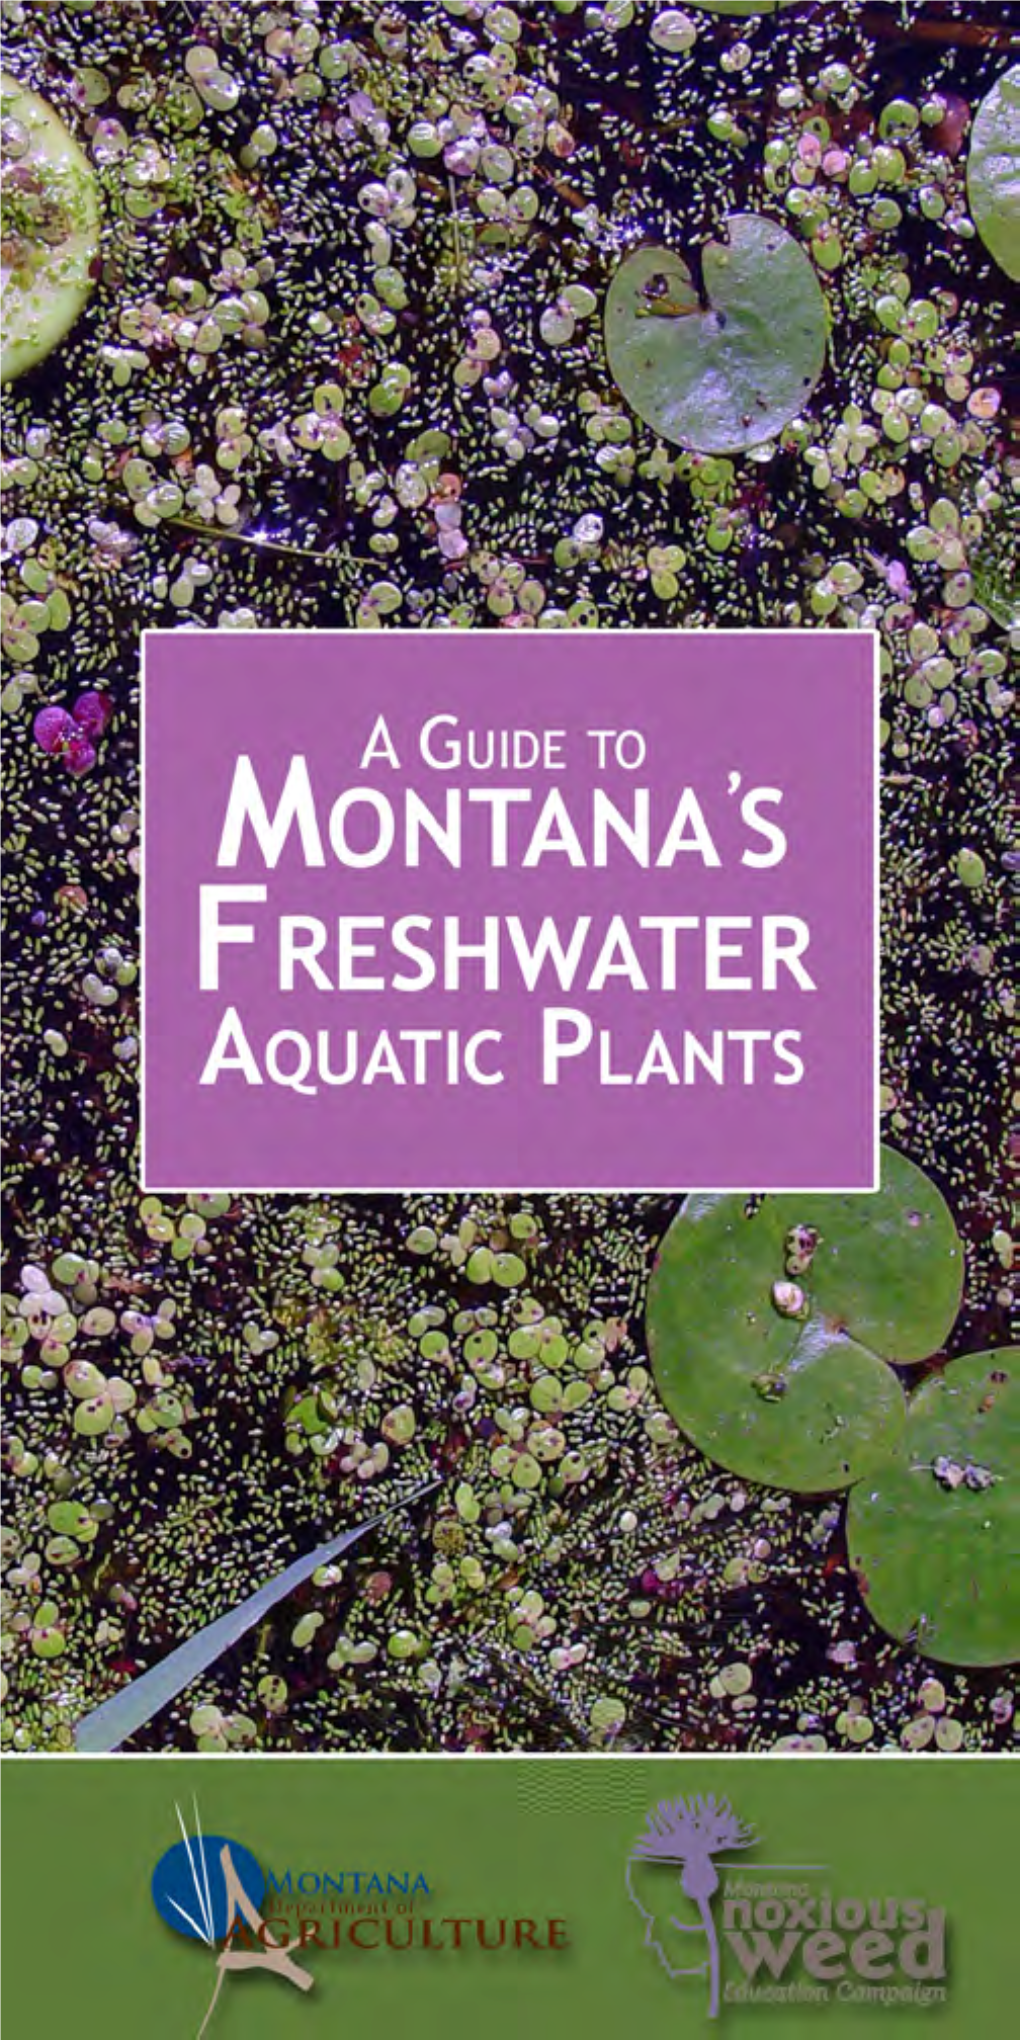 A Guide to Montana's Freshwater Aquatic Plants